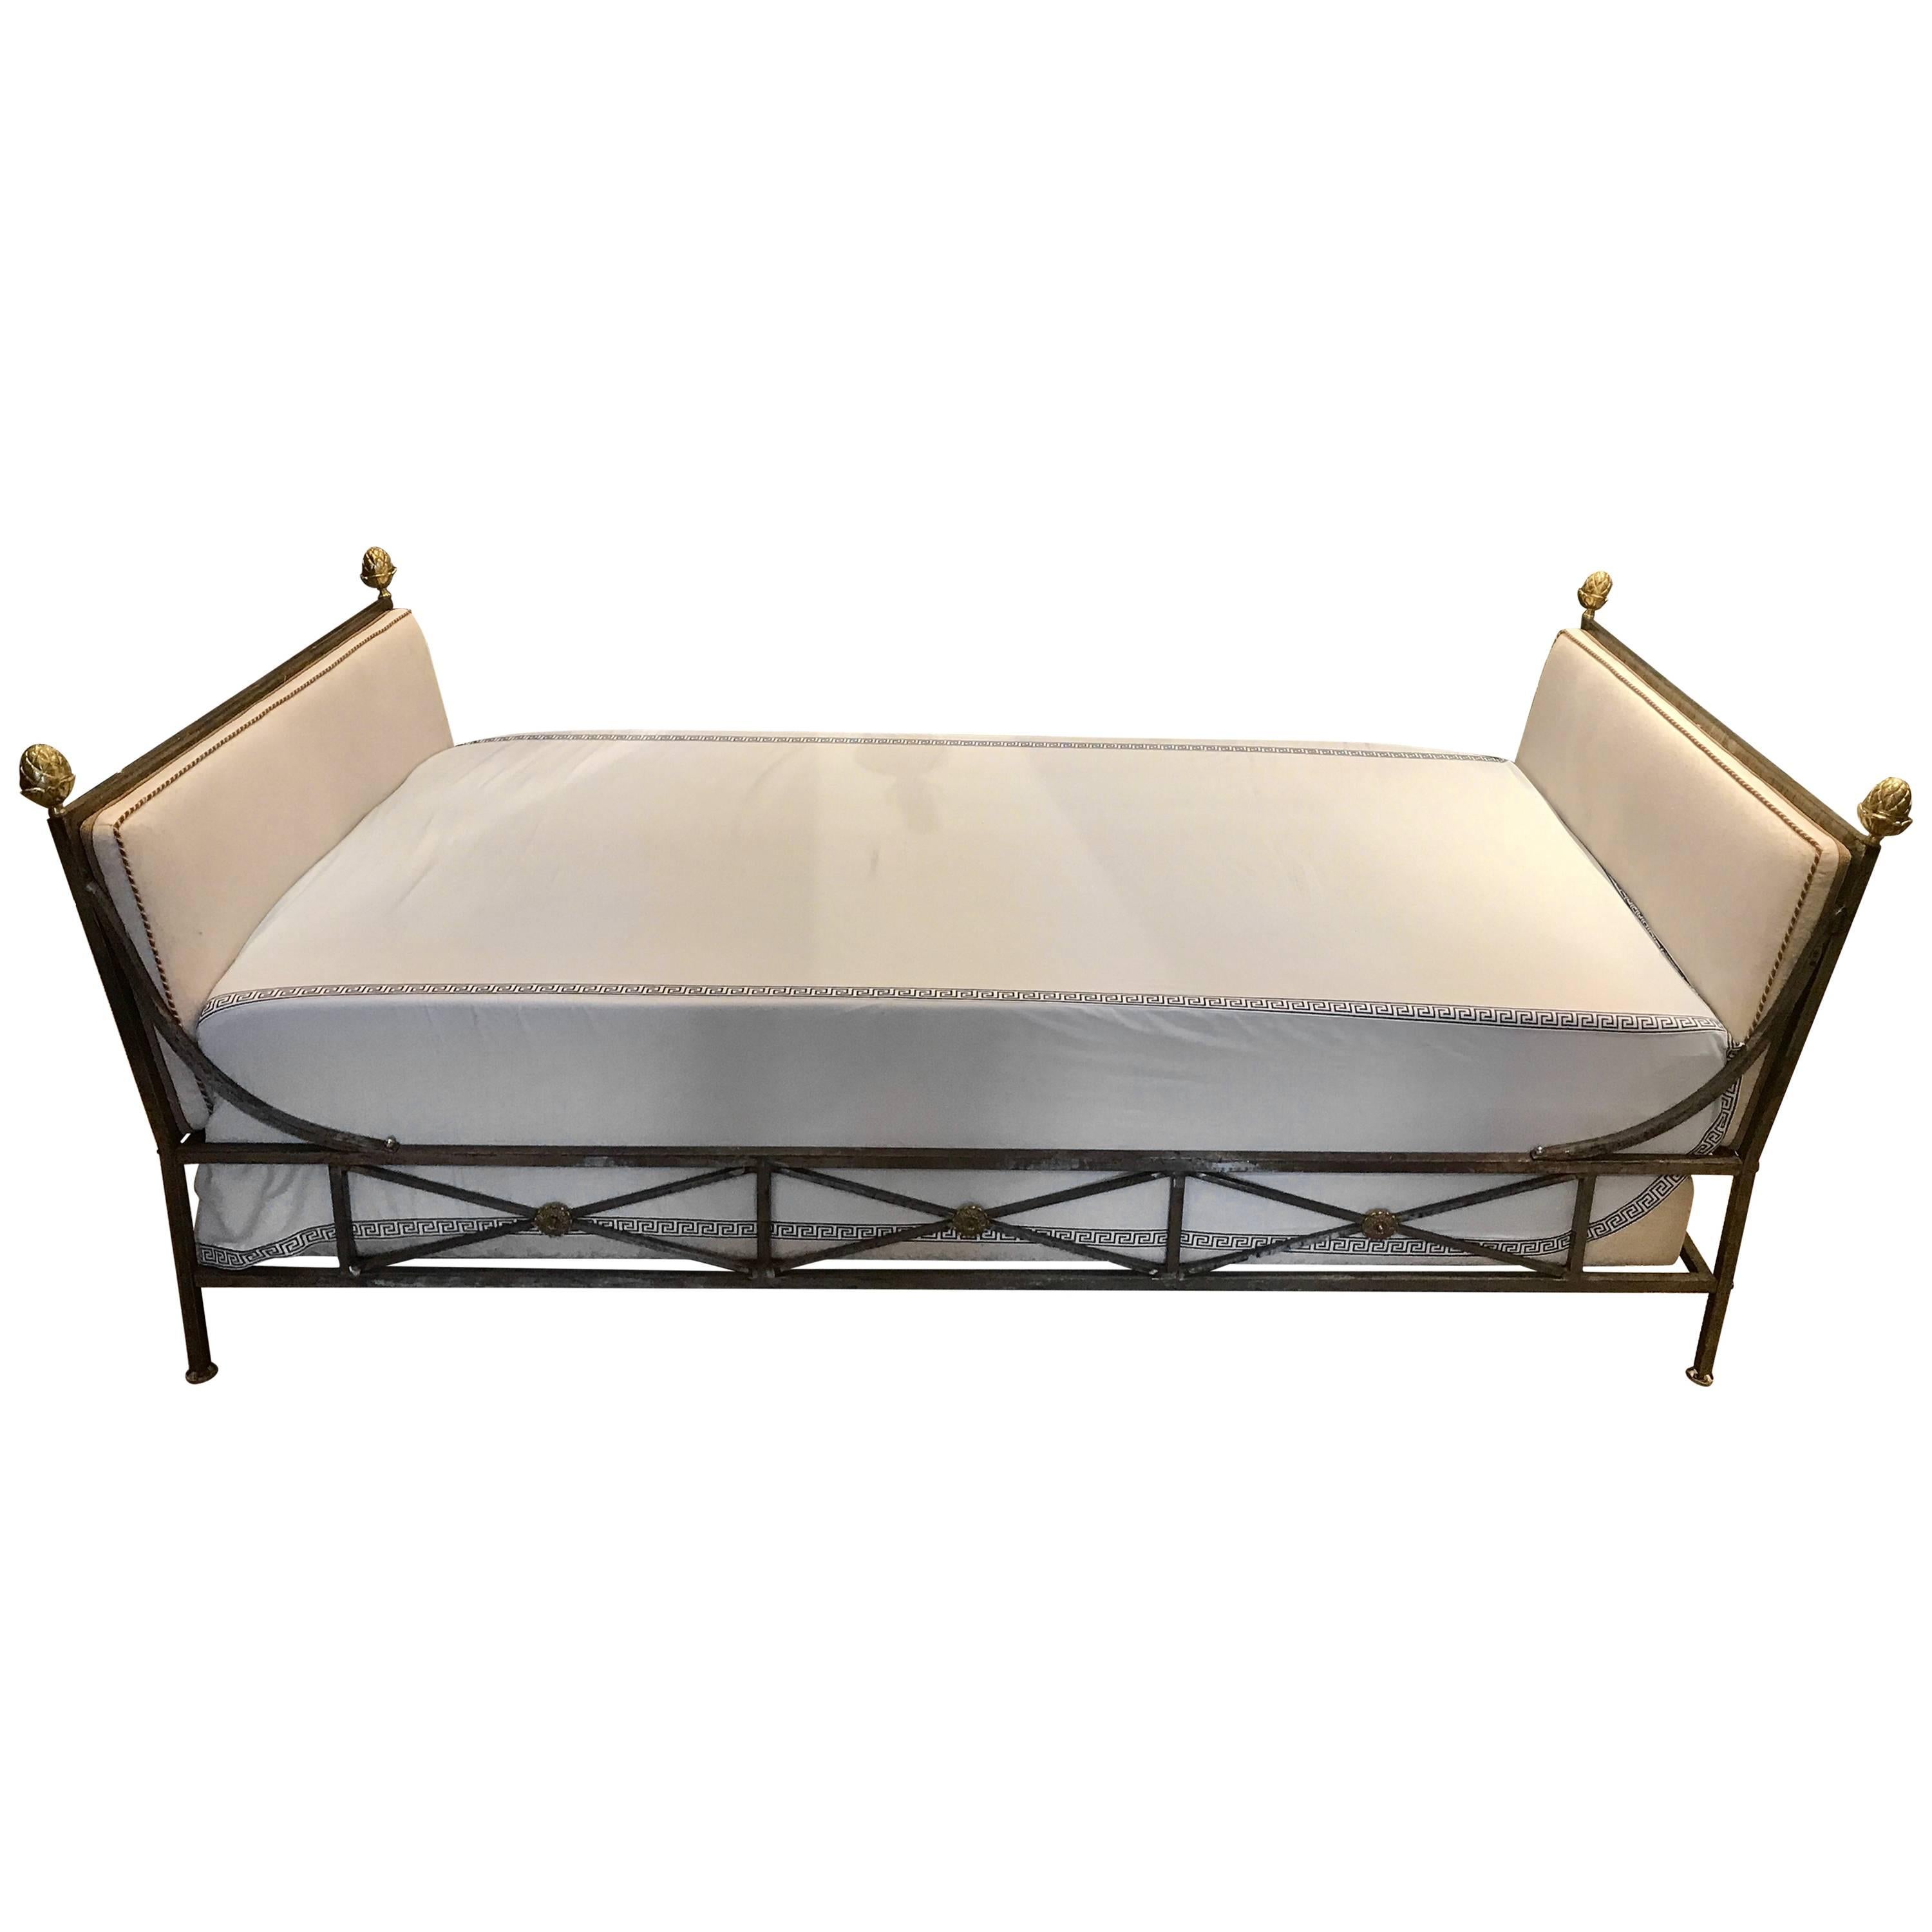 Maison Jansen Neoclassical Steel and Brass Daybed